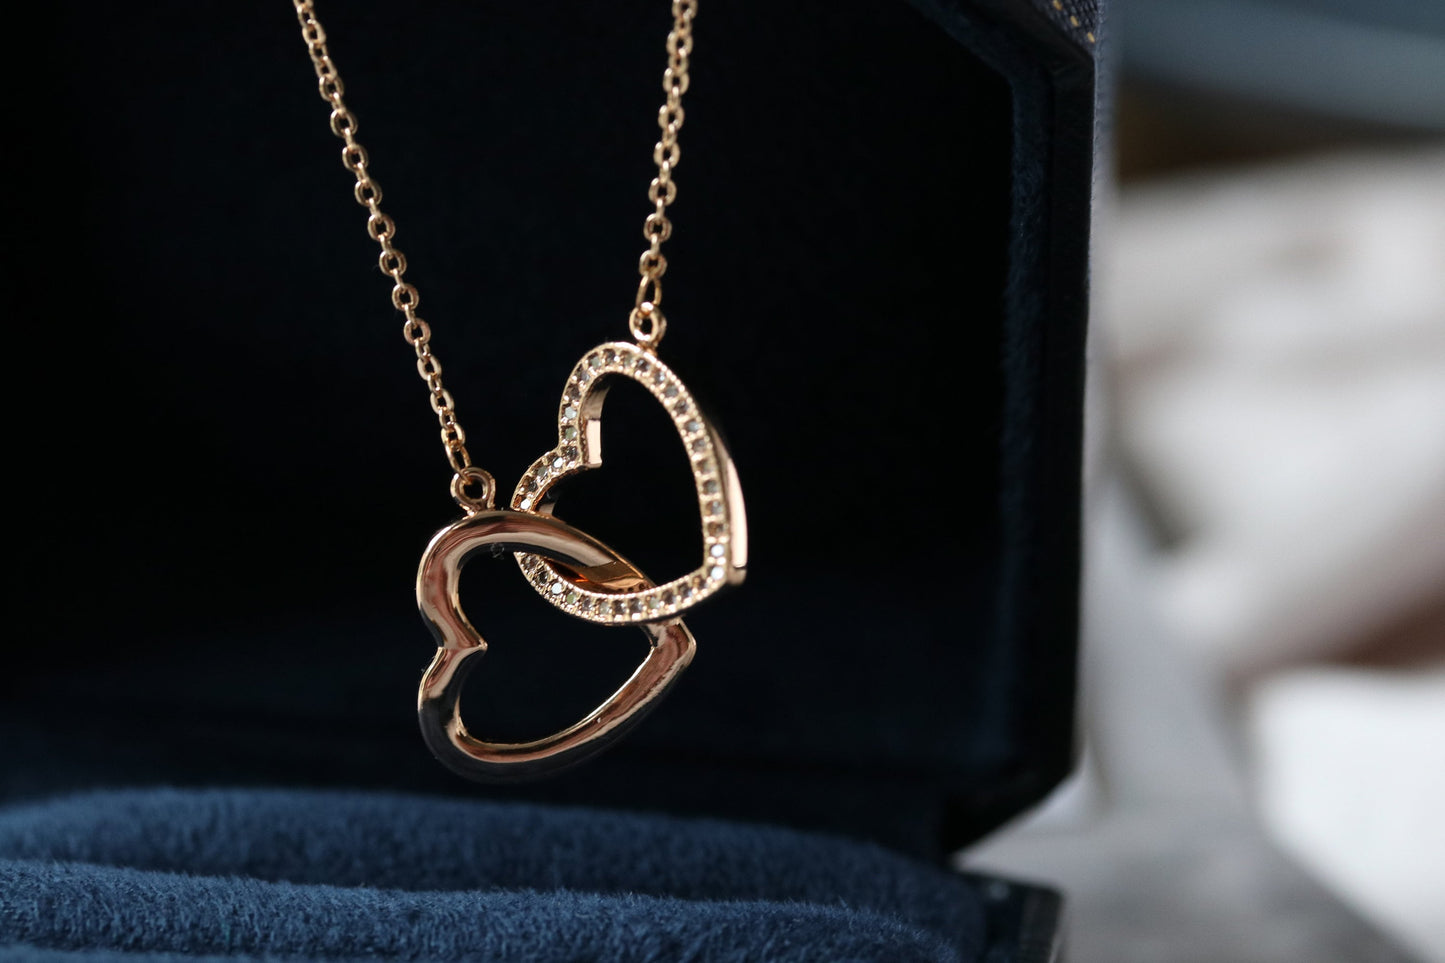 Interlinking Circle or Heart Gift Necklace / SYMBOLOGY / Marvellous Mum Necklace in Silver Gold or Rose Gold / Family Gift / Mothers Day